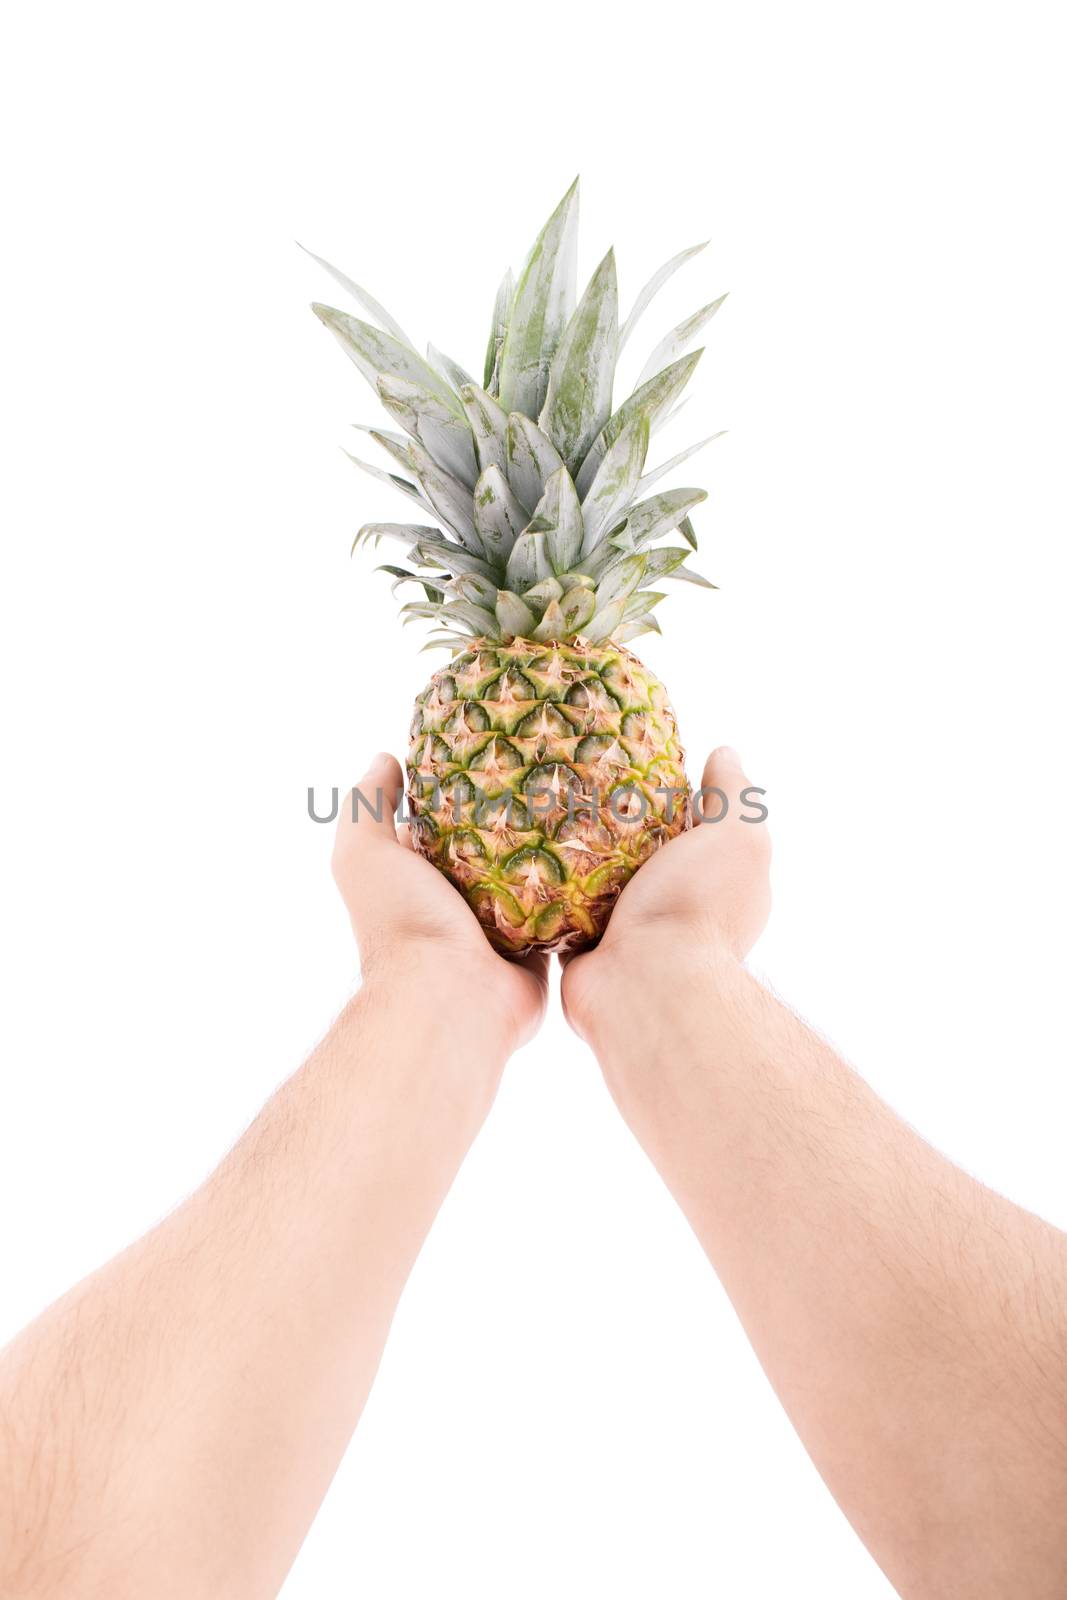 Stretched out male hands offering uncut pineapple, isolated on white background.